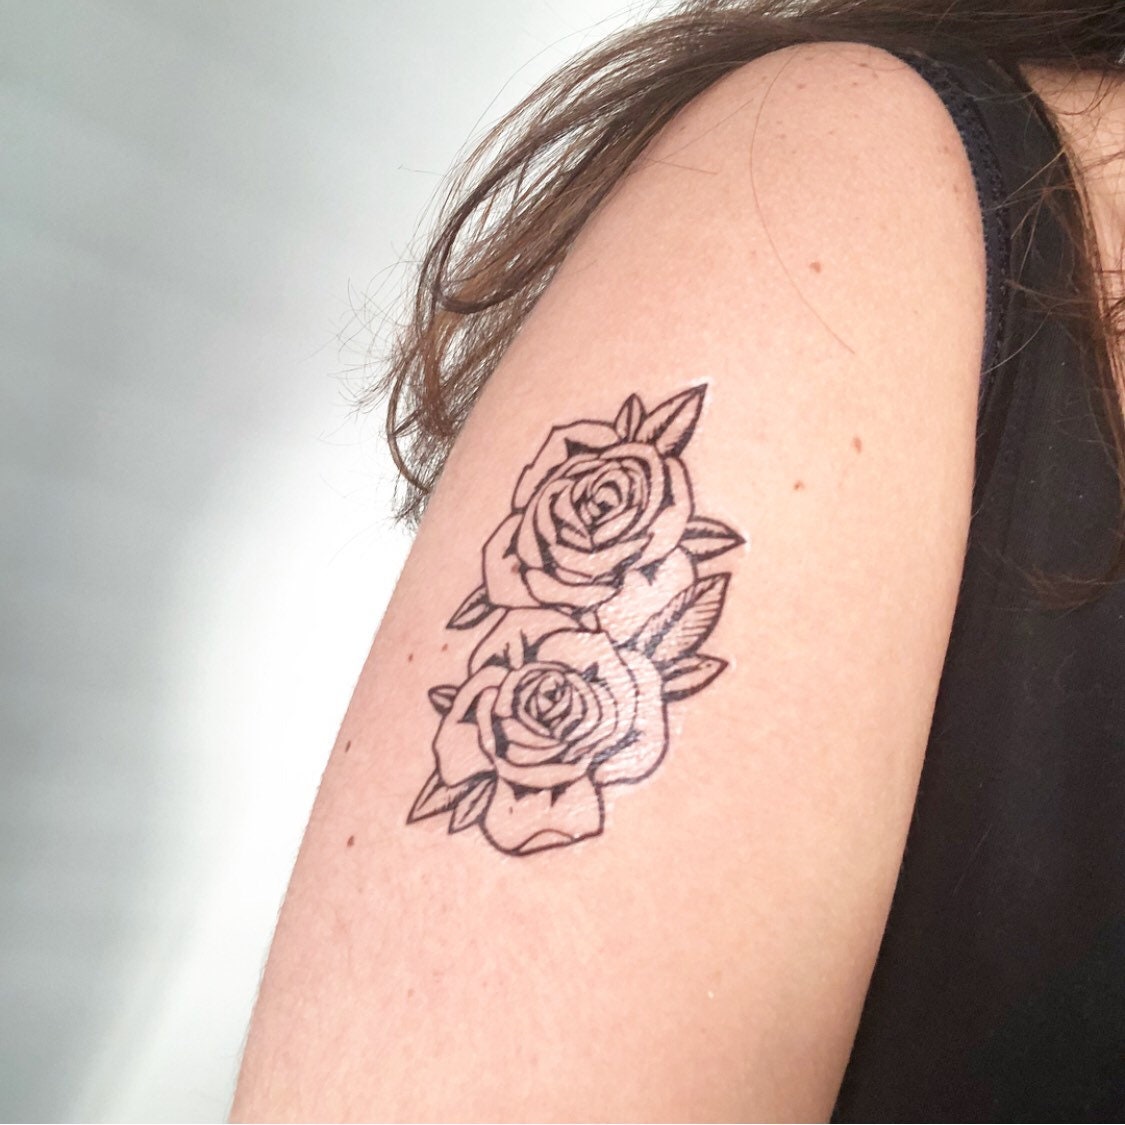 Light and Shade - 🌹Beautiful rose done by @pastilah_ink at @lightandshade. tattoo. ➡️Follow us on Instagram and Facebook. ➡️For info and bookings,  contact us on Instagram, Facebook or WhatsApp : 01738162953  #lightandshadetattoo #flowers #